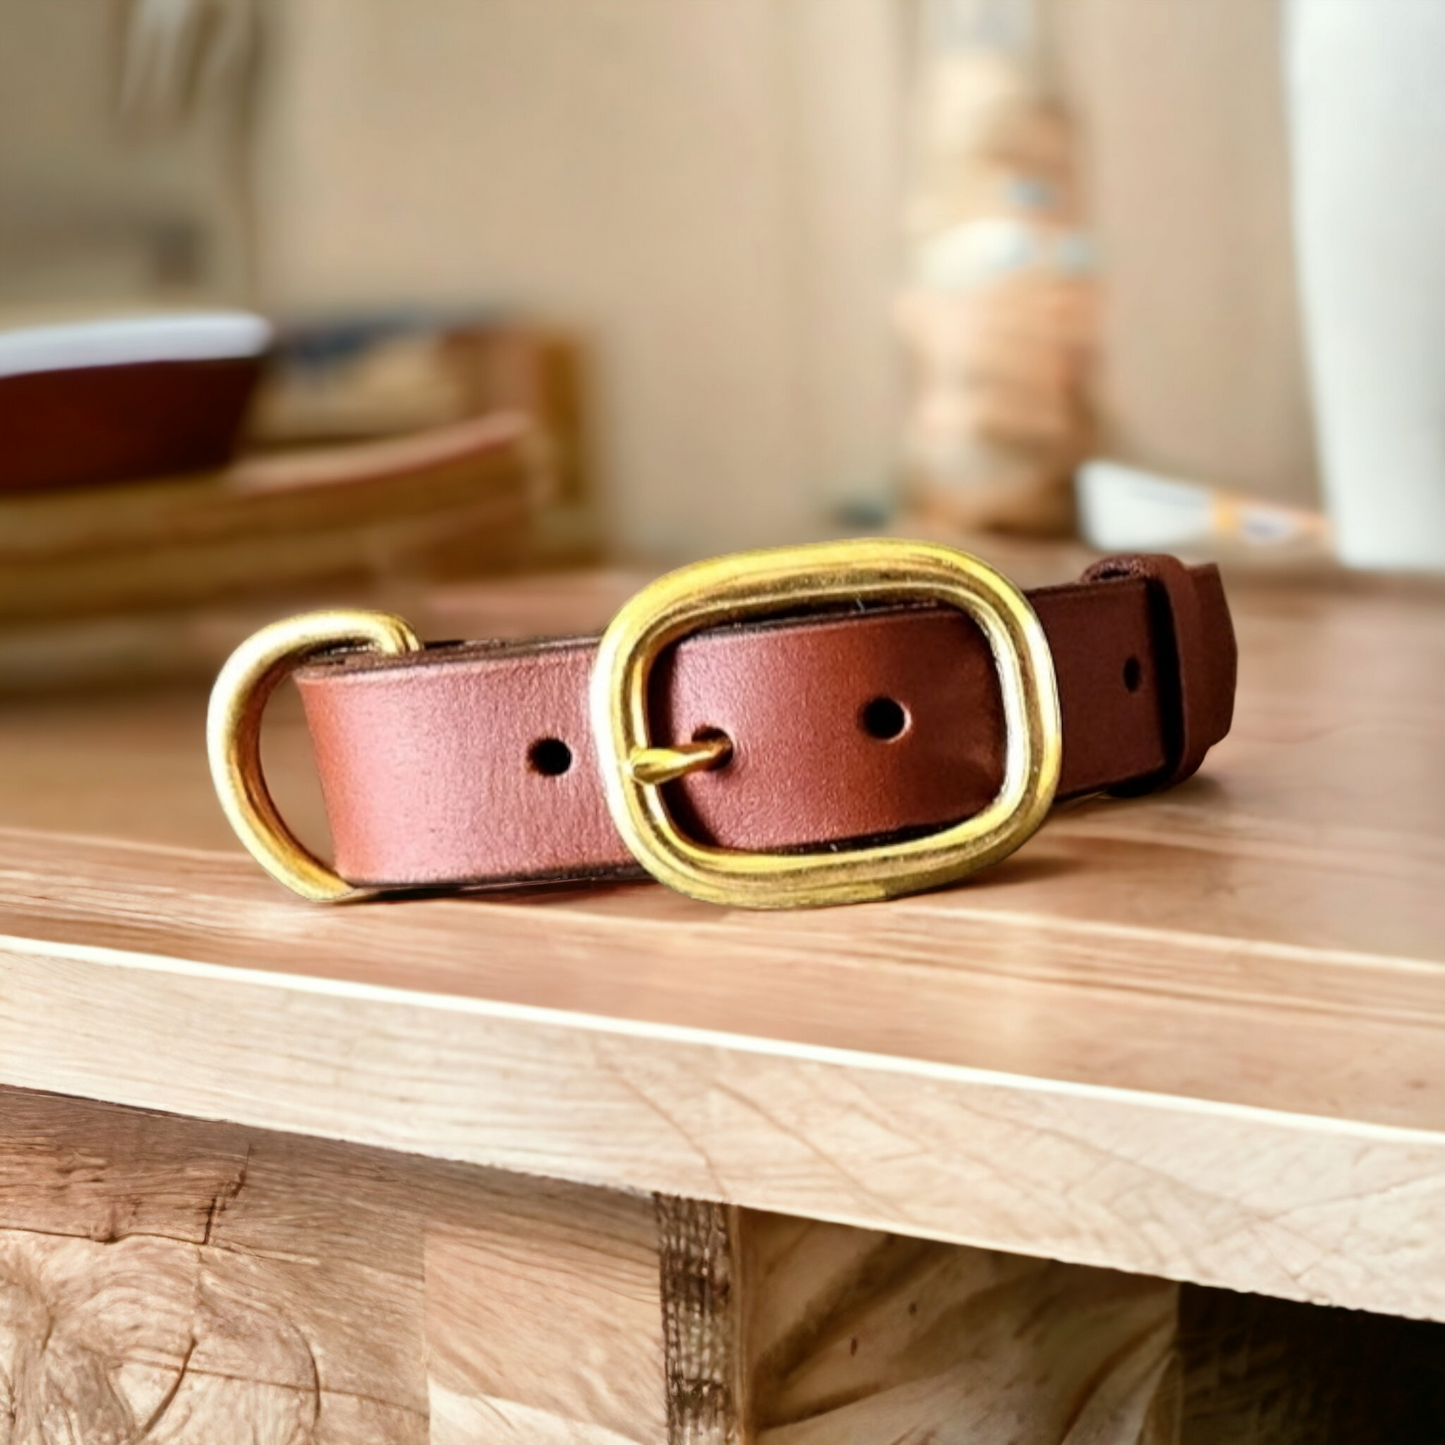 The working or larger, leather dog collar in brass swage buckles